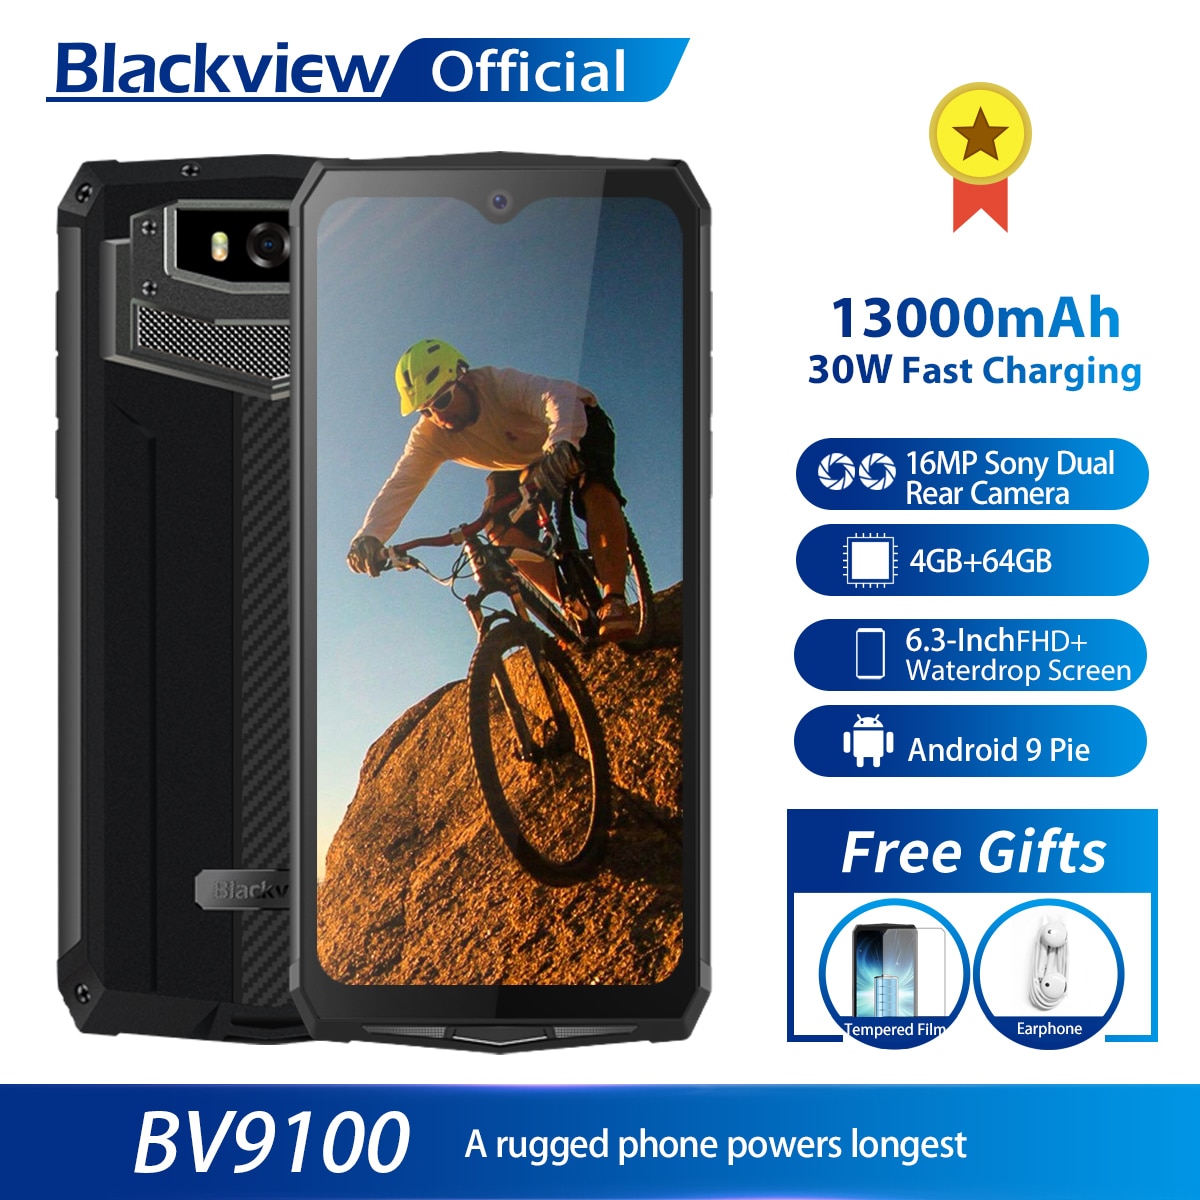 Original Blackview BV9100 13000mAh Waterproof Rugged Smartphone Helio P35 4GB+64GB Android 9.0 Mobile Phone 30W Fast Charge